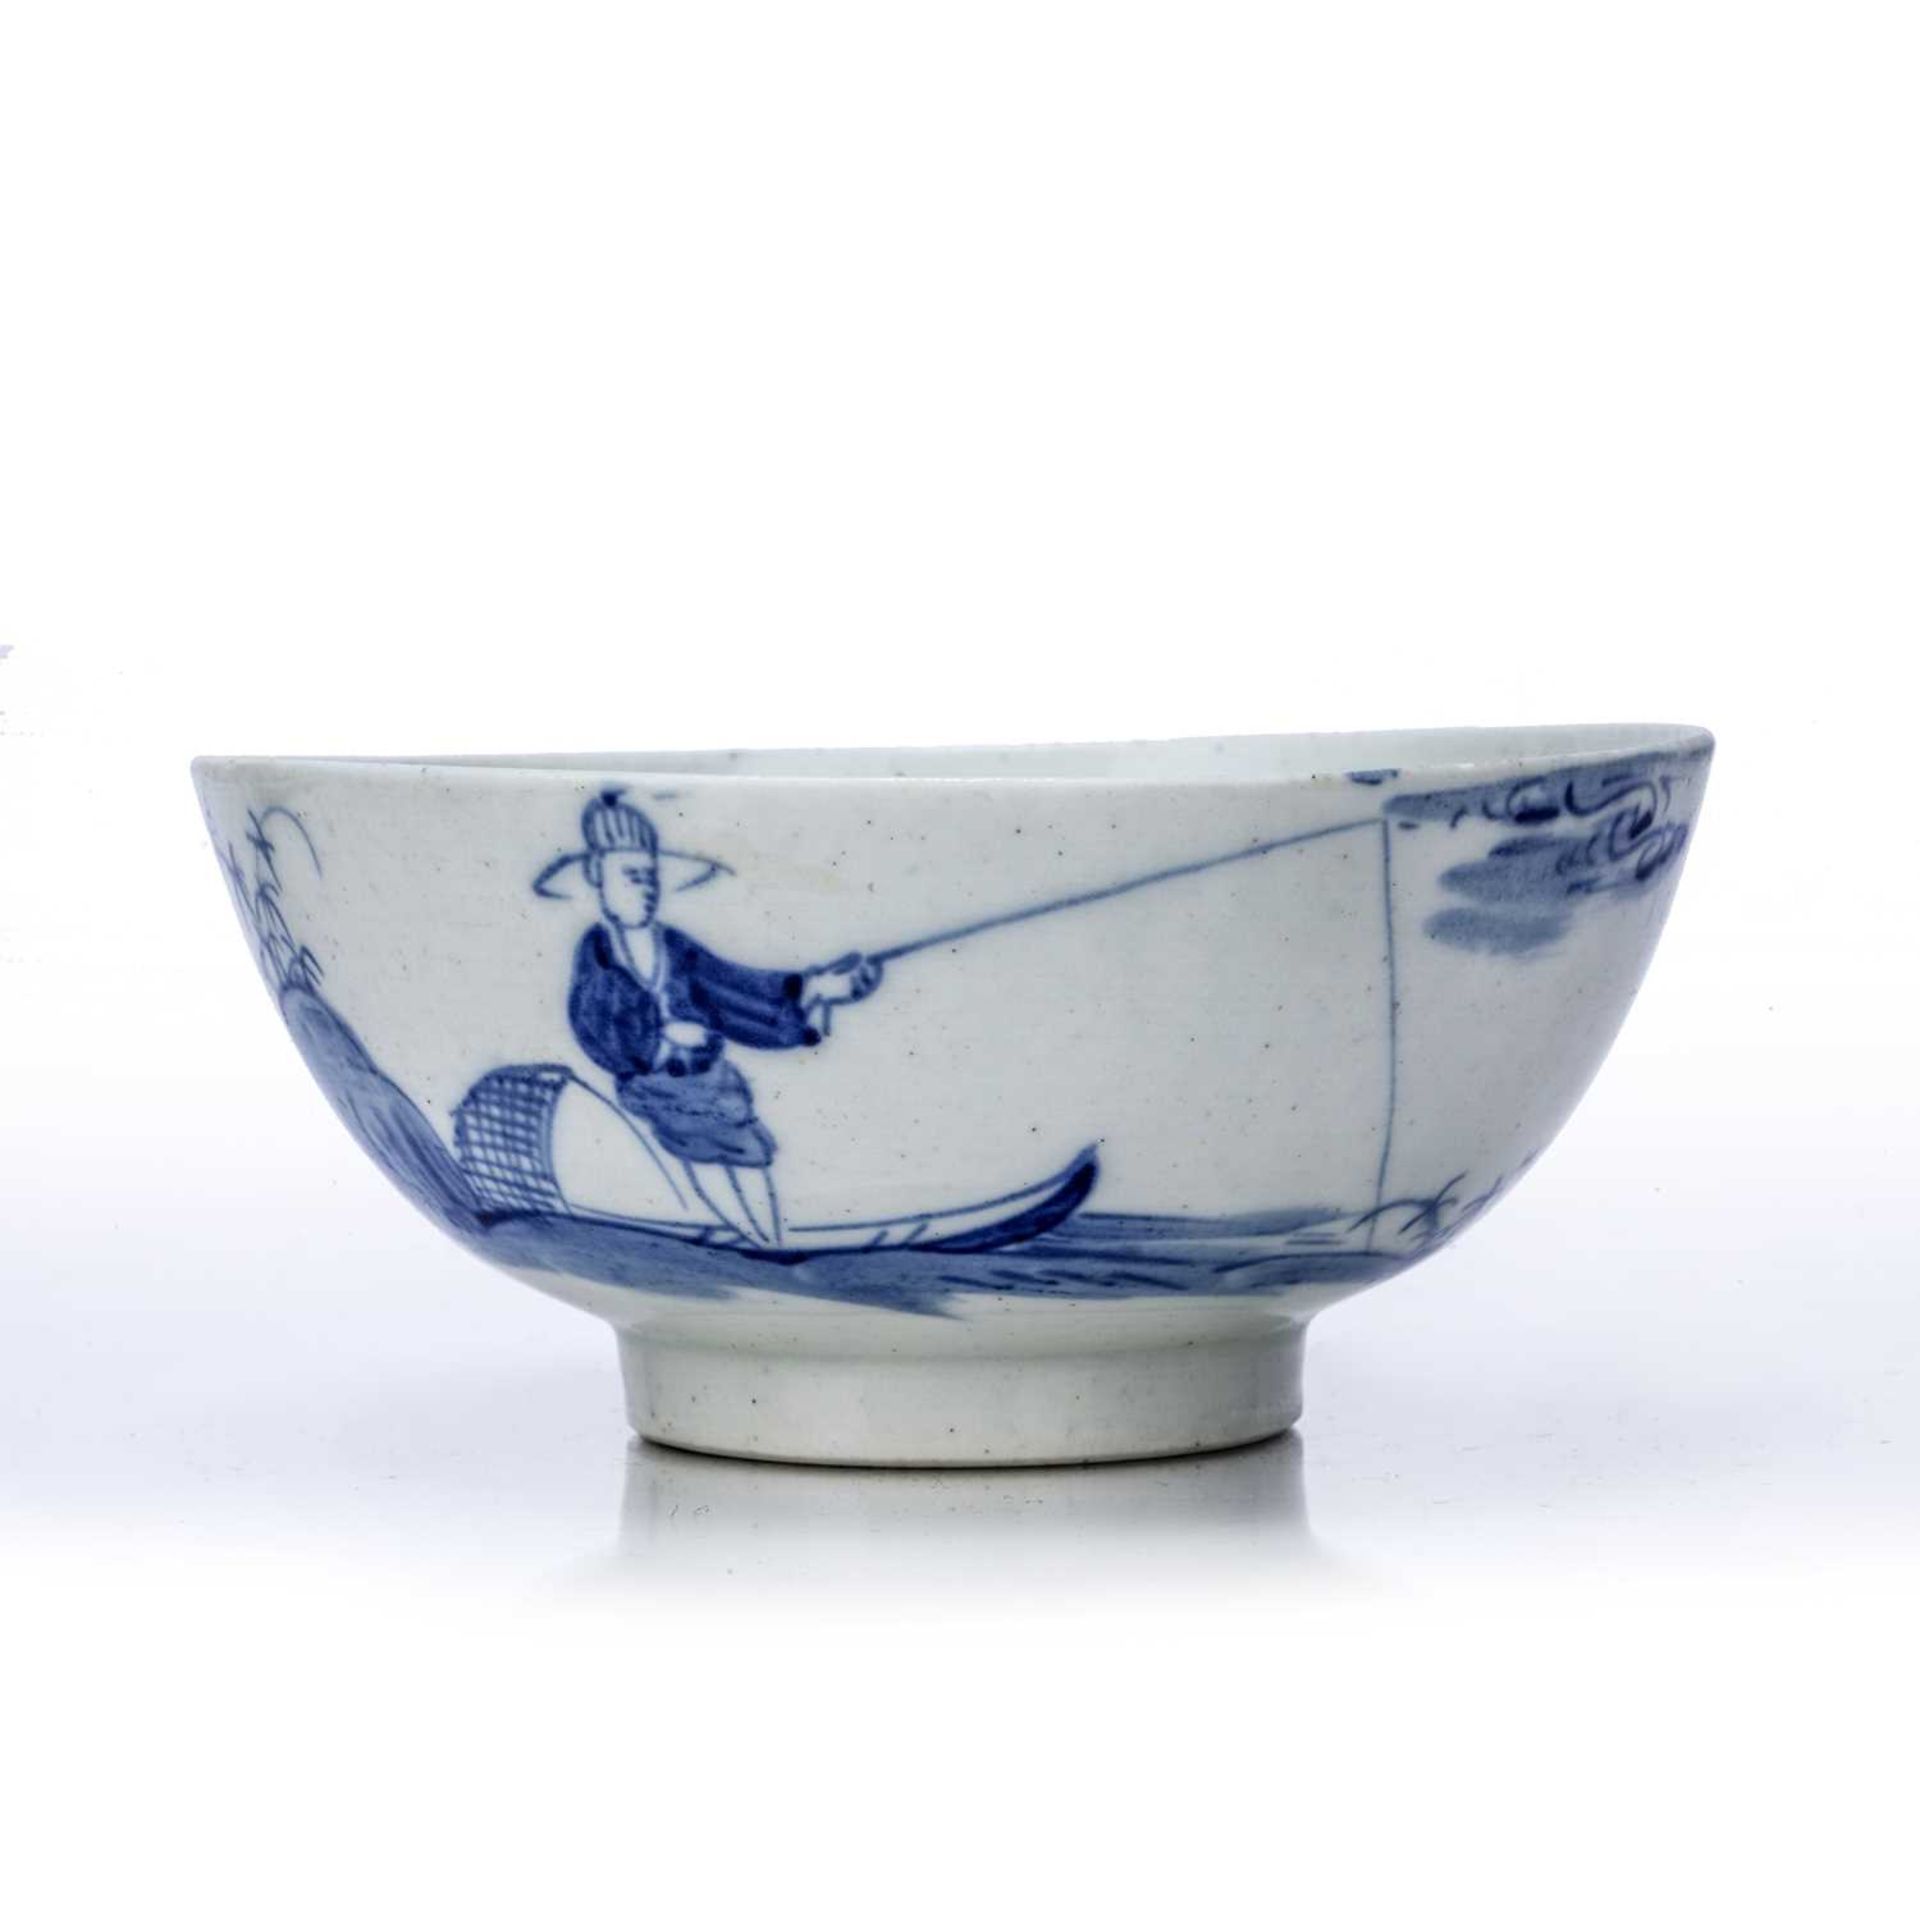 Bow bowl circa 1750-52, decorated with Crossed-Legged Chinaman pattern, 15cm across x 6.5cm high See